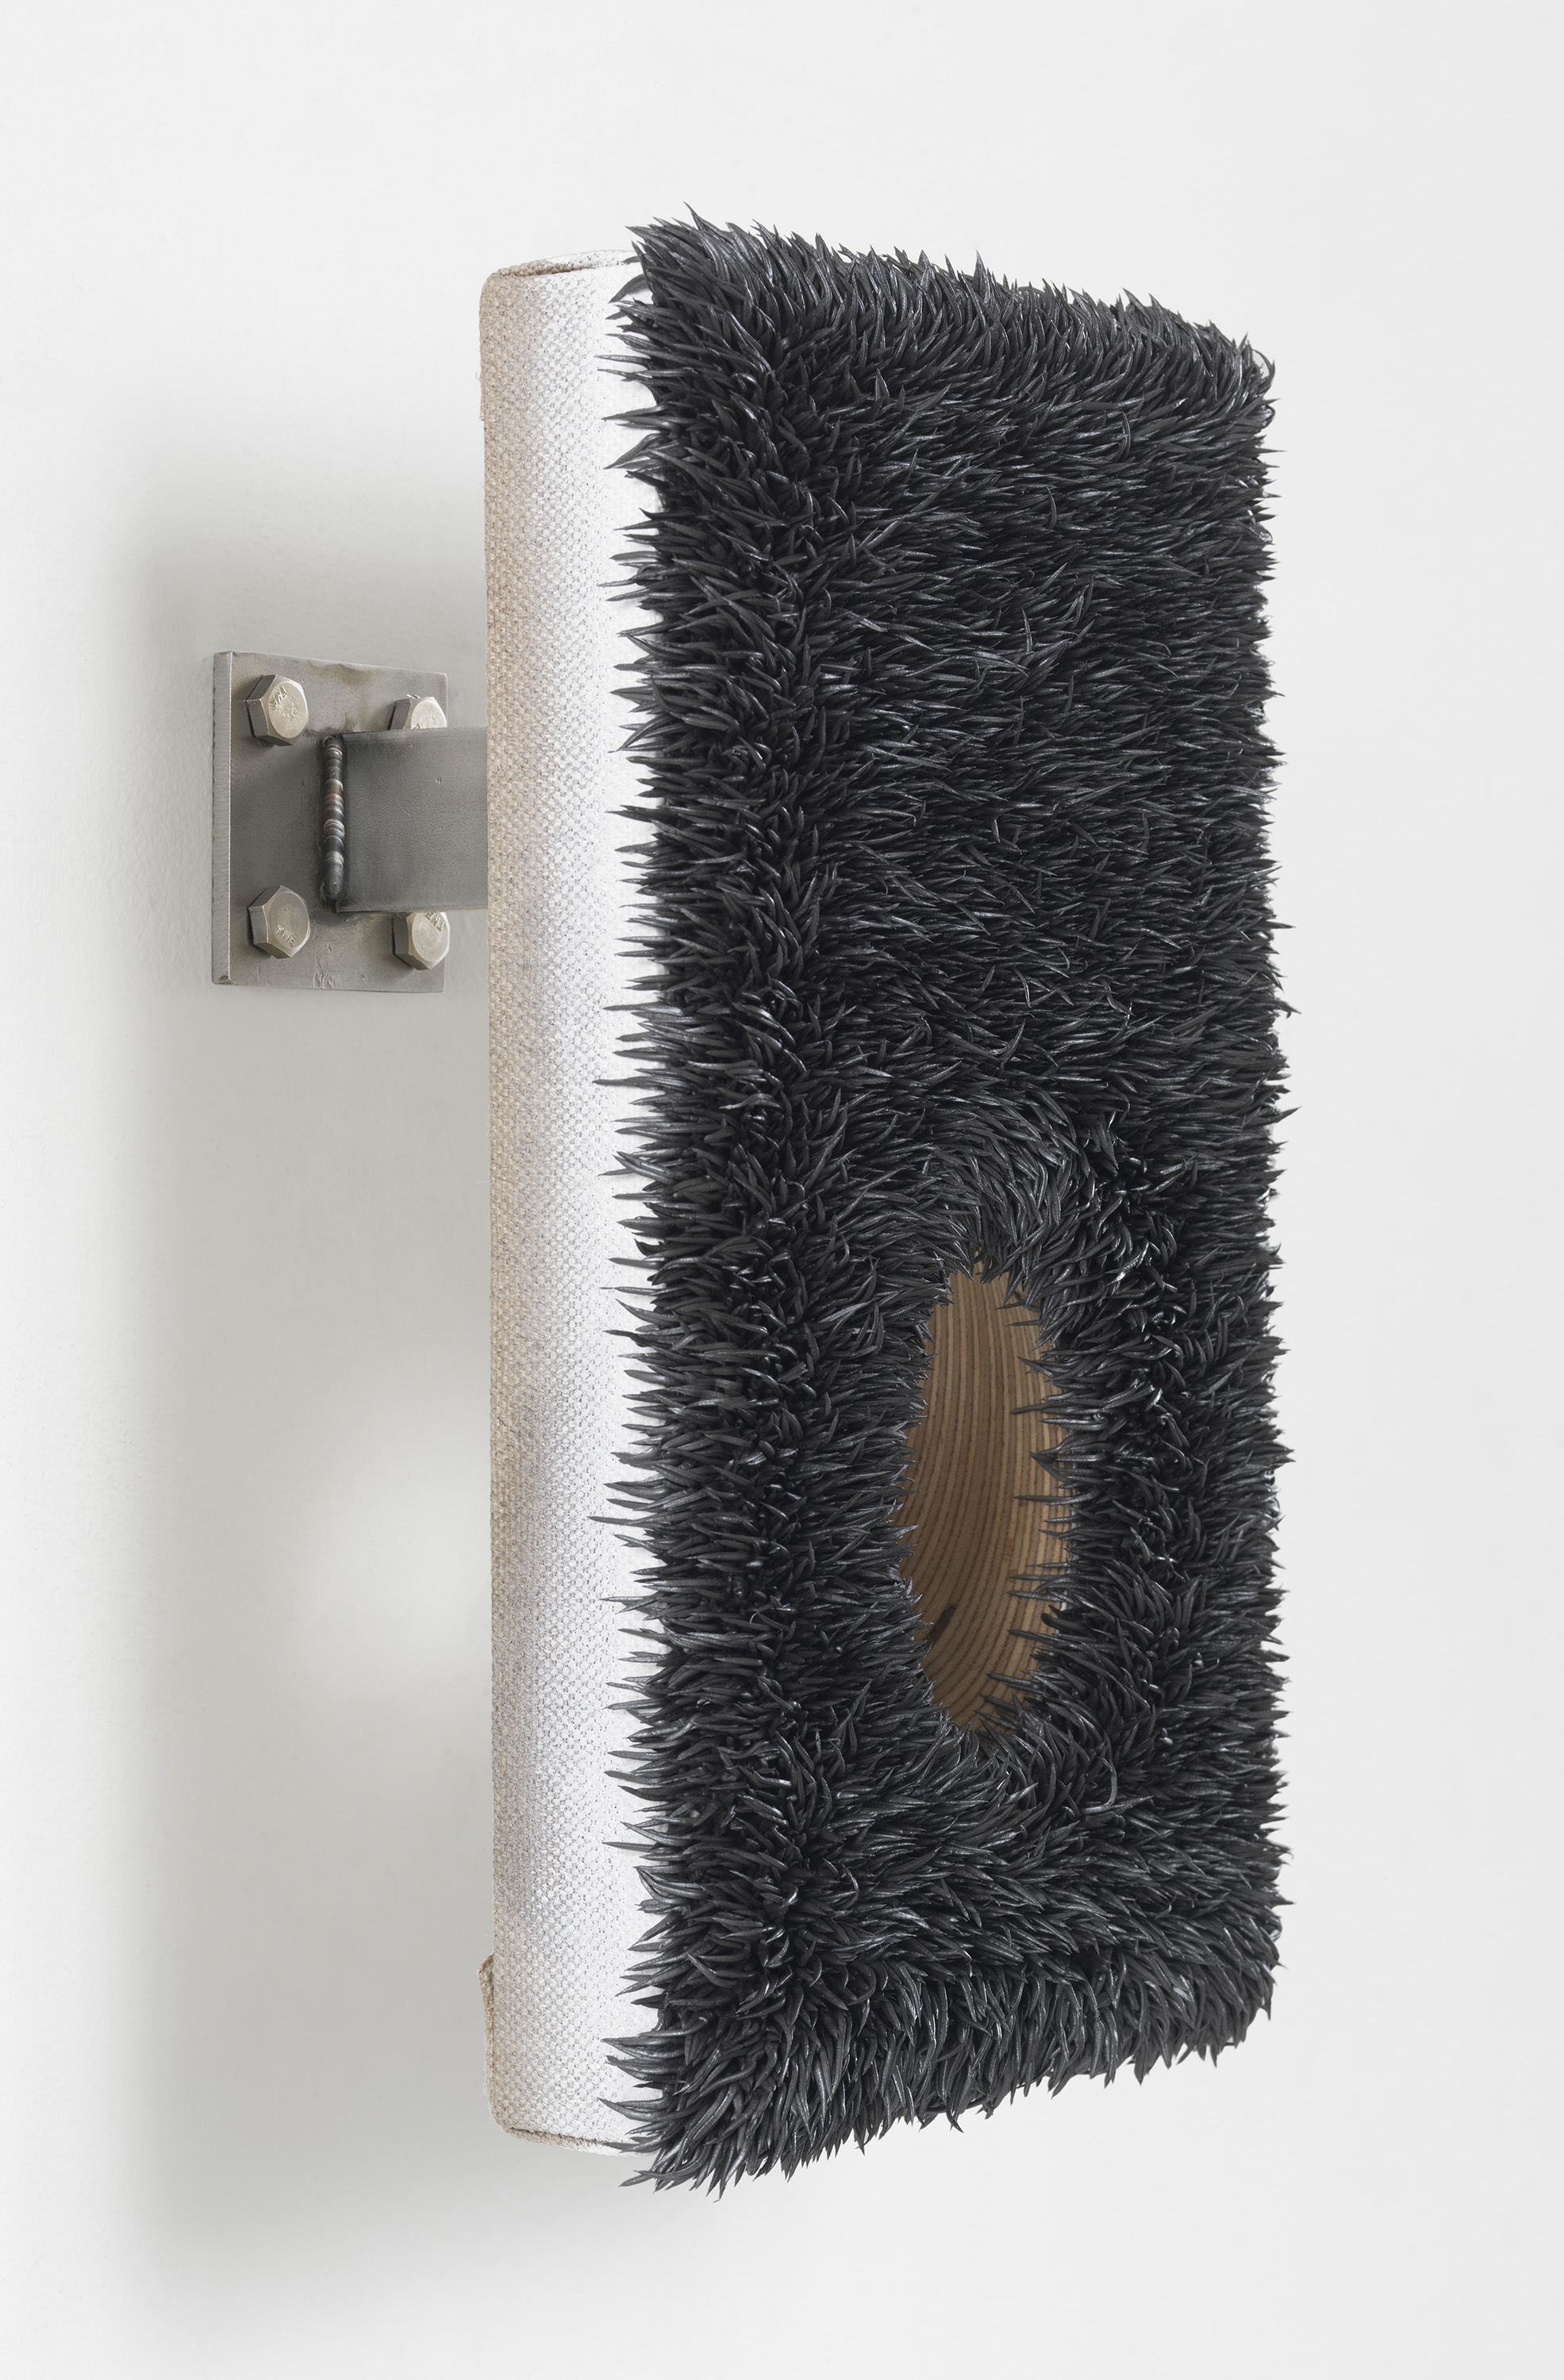 Donald Moffett, Lot 040117 (45° hole, pewter), 2017, oil on linen, wood panel, steel, 12.25h x 7.50w x 6.25d in. Courtesy of the artist and Marianne Boesky Gallery, New York and Aspen. © Donald Moffett. Photo Credit: Christopher Burke Studios.